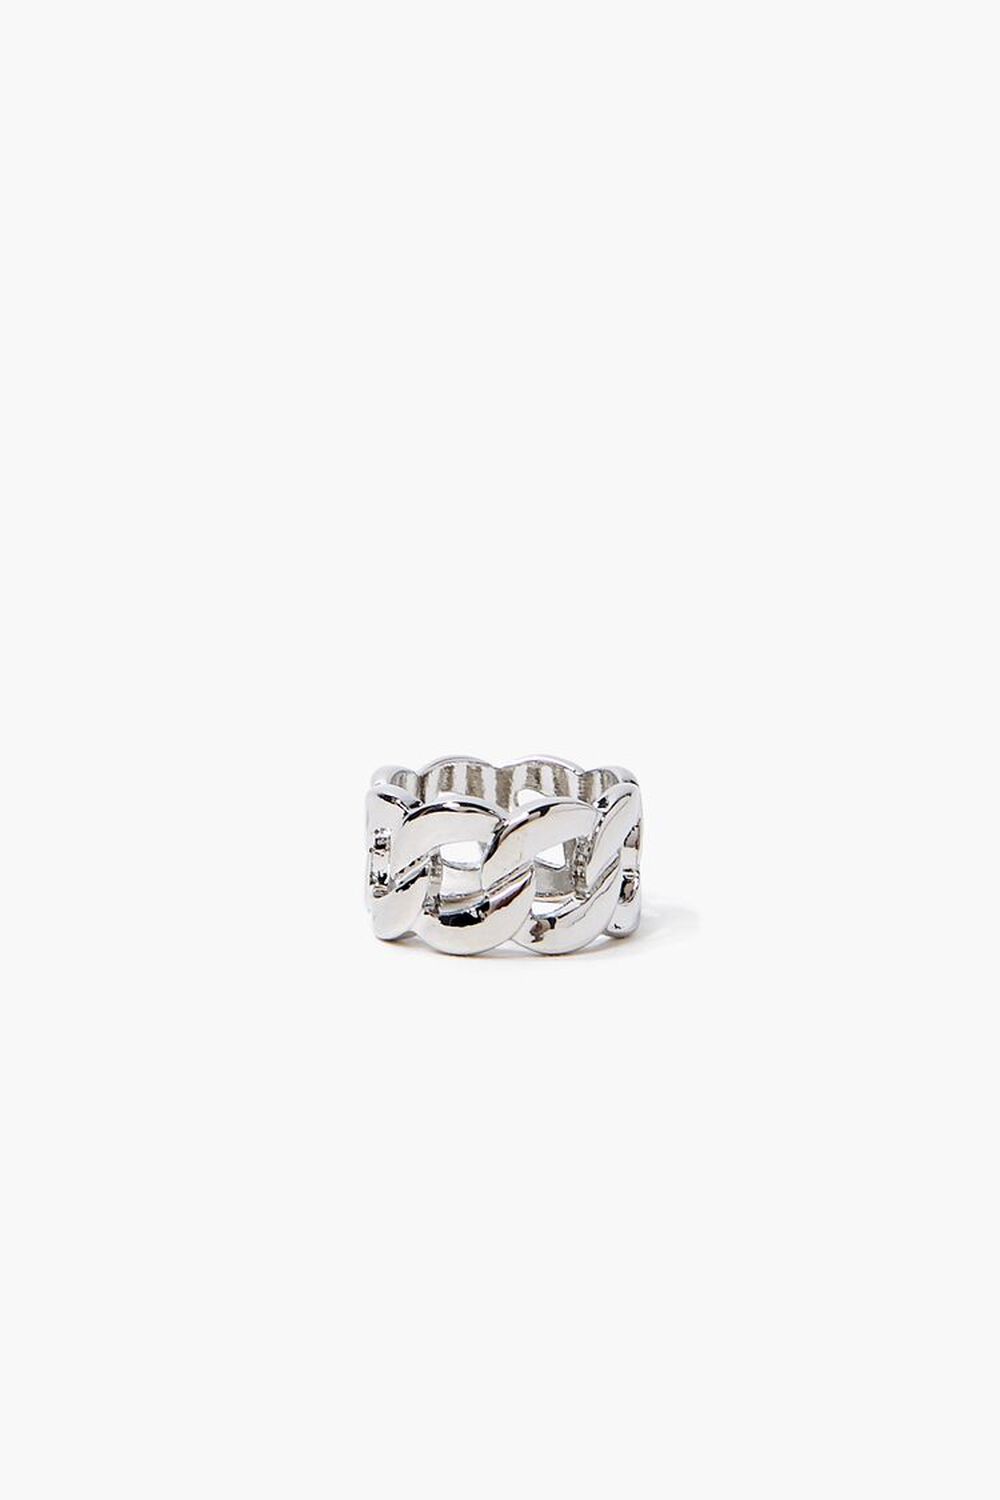 SILVER Chunky Curb Chain Ring, image 1